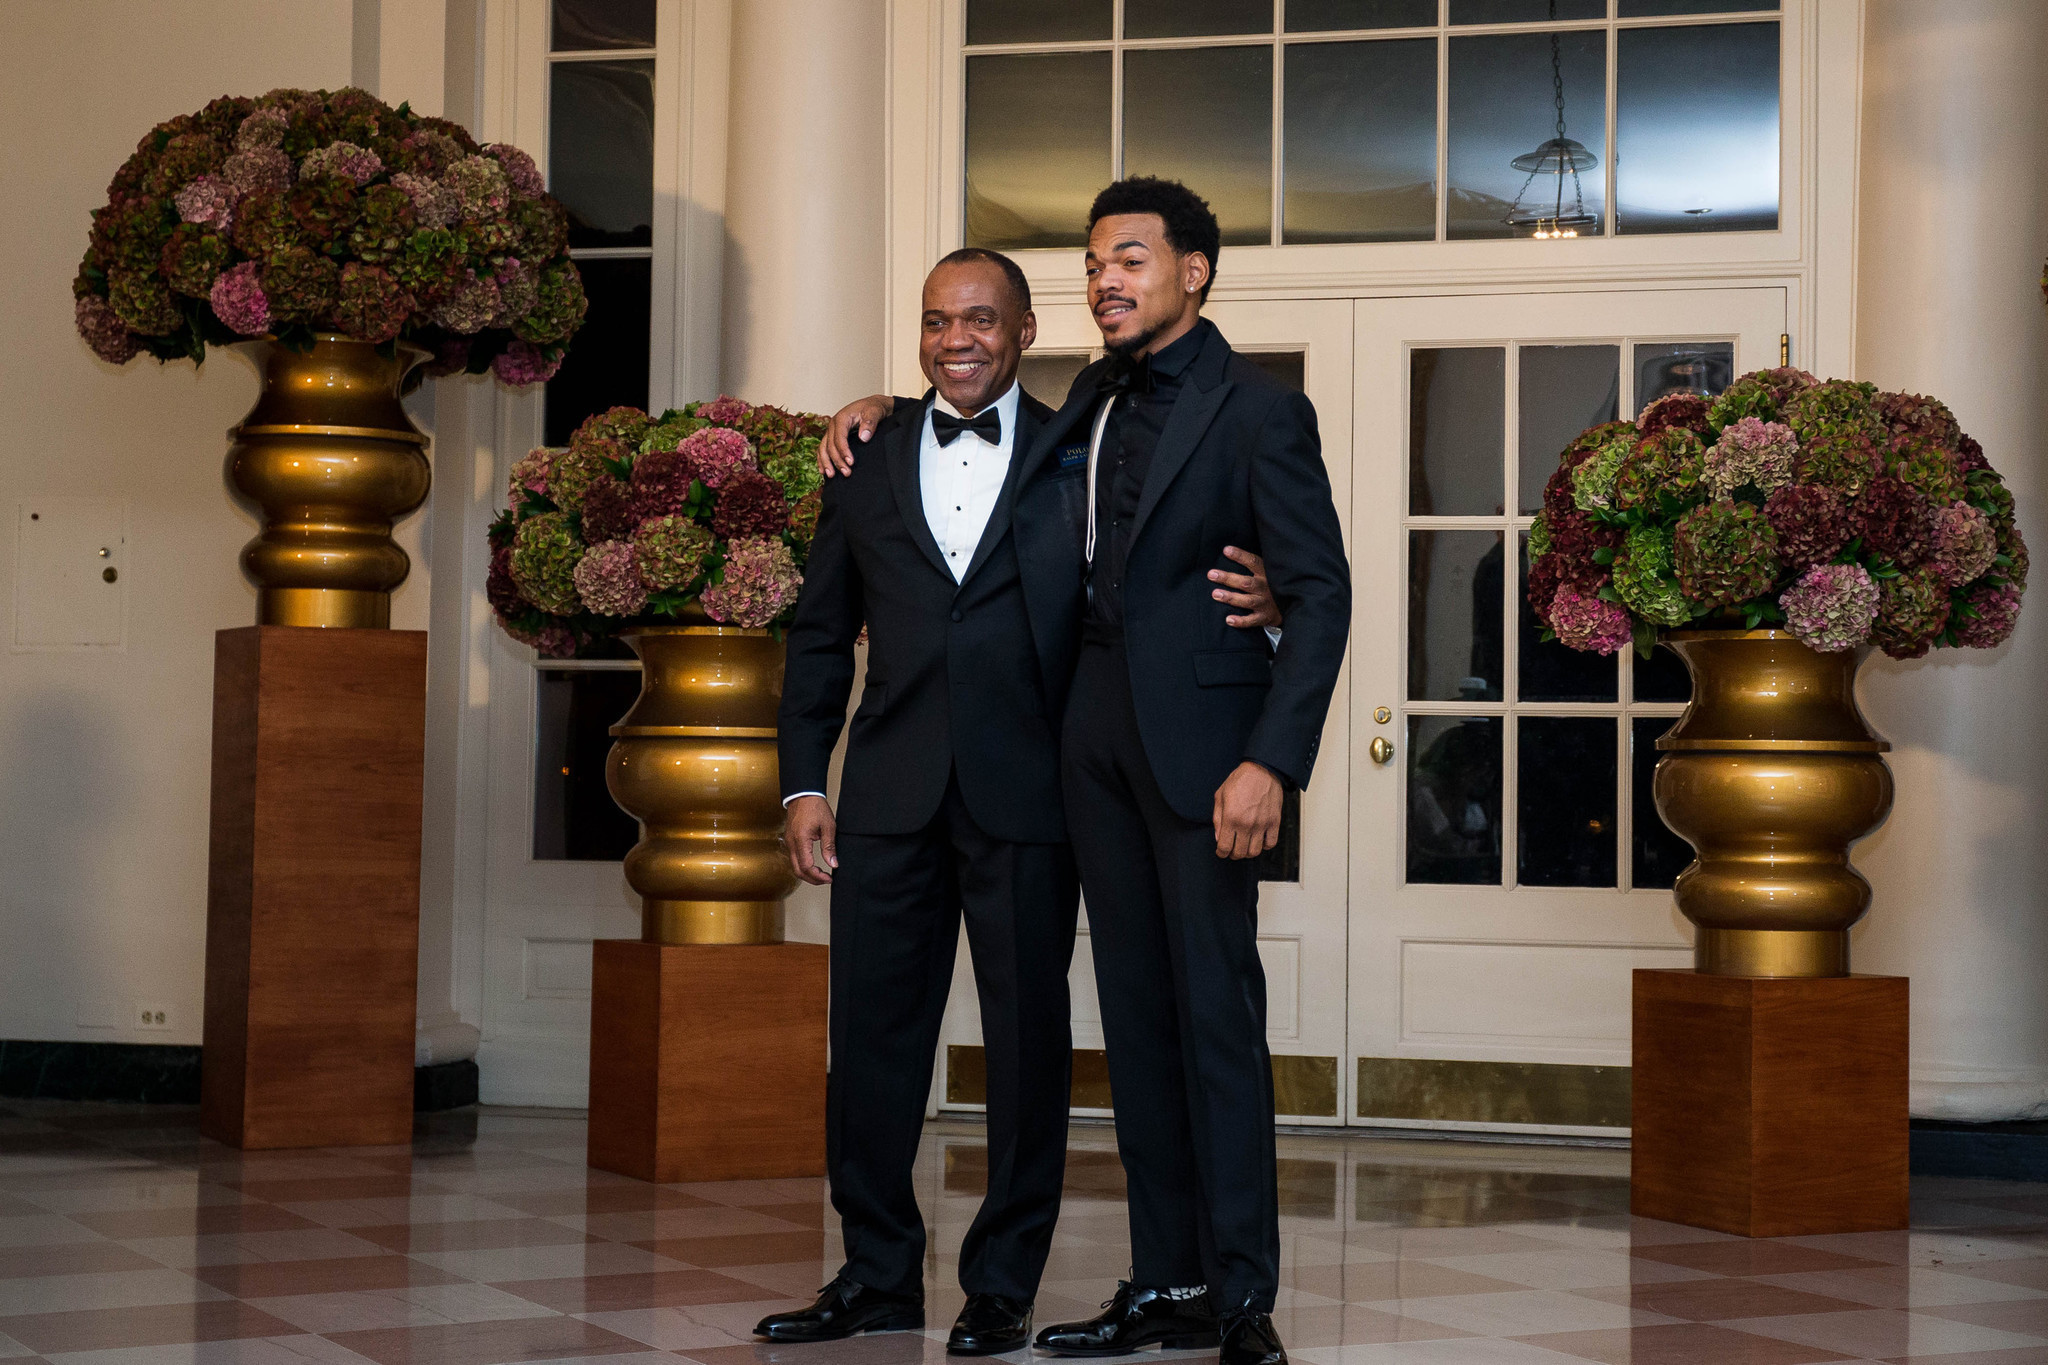 Chance the Rapper among Chicagoans at final Obama state dinner - Chicago Tribune